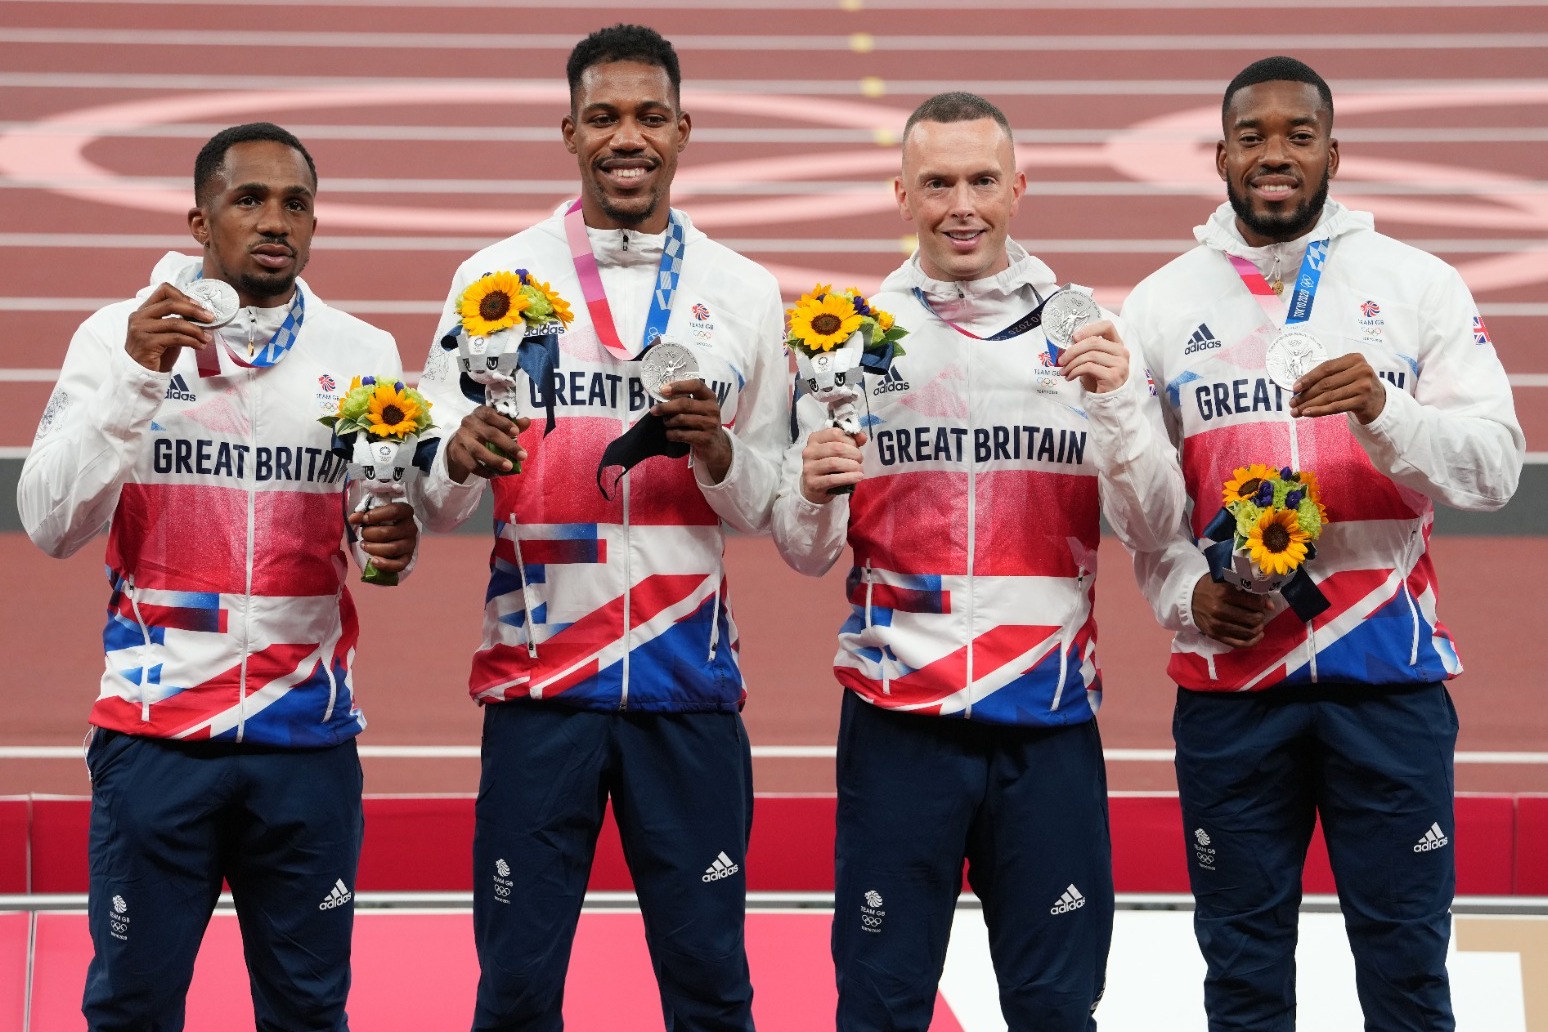 Team GB stripped of Olympic 4x100m relay silver over CJ Ujah doping violation 